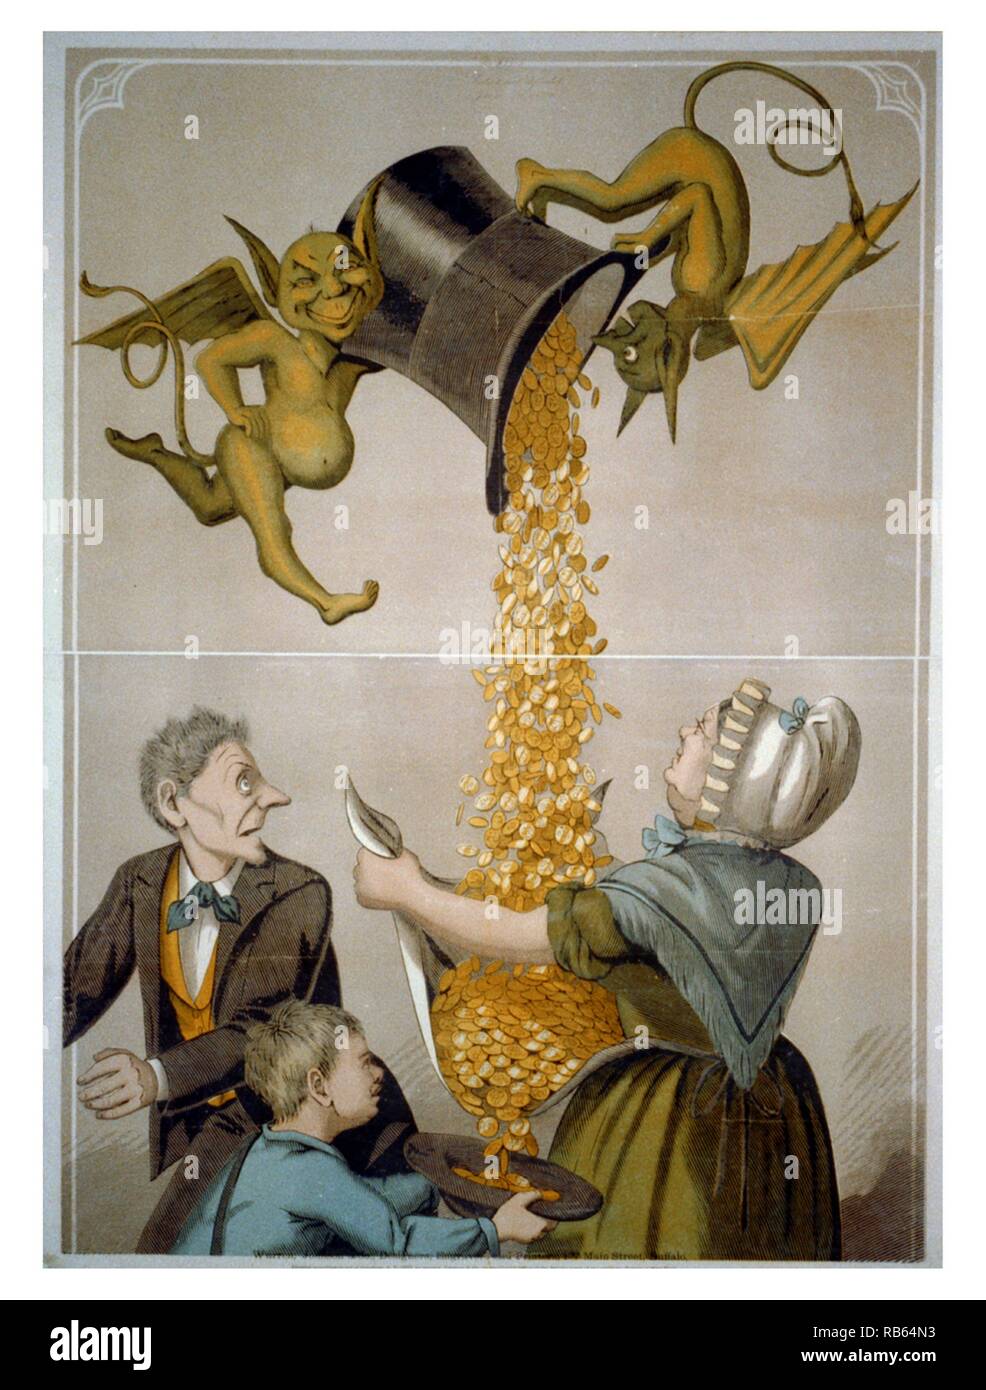 Colour engraving depicting Devils pouring gold coins from hat into woman's apron and boy's hat. Dated 1870 Stock Photo